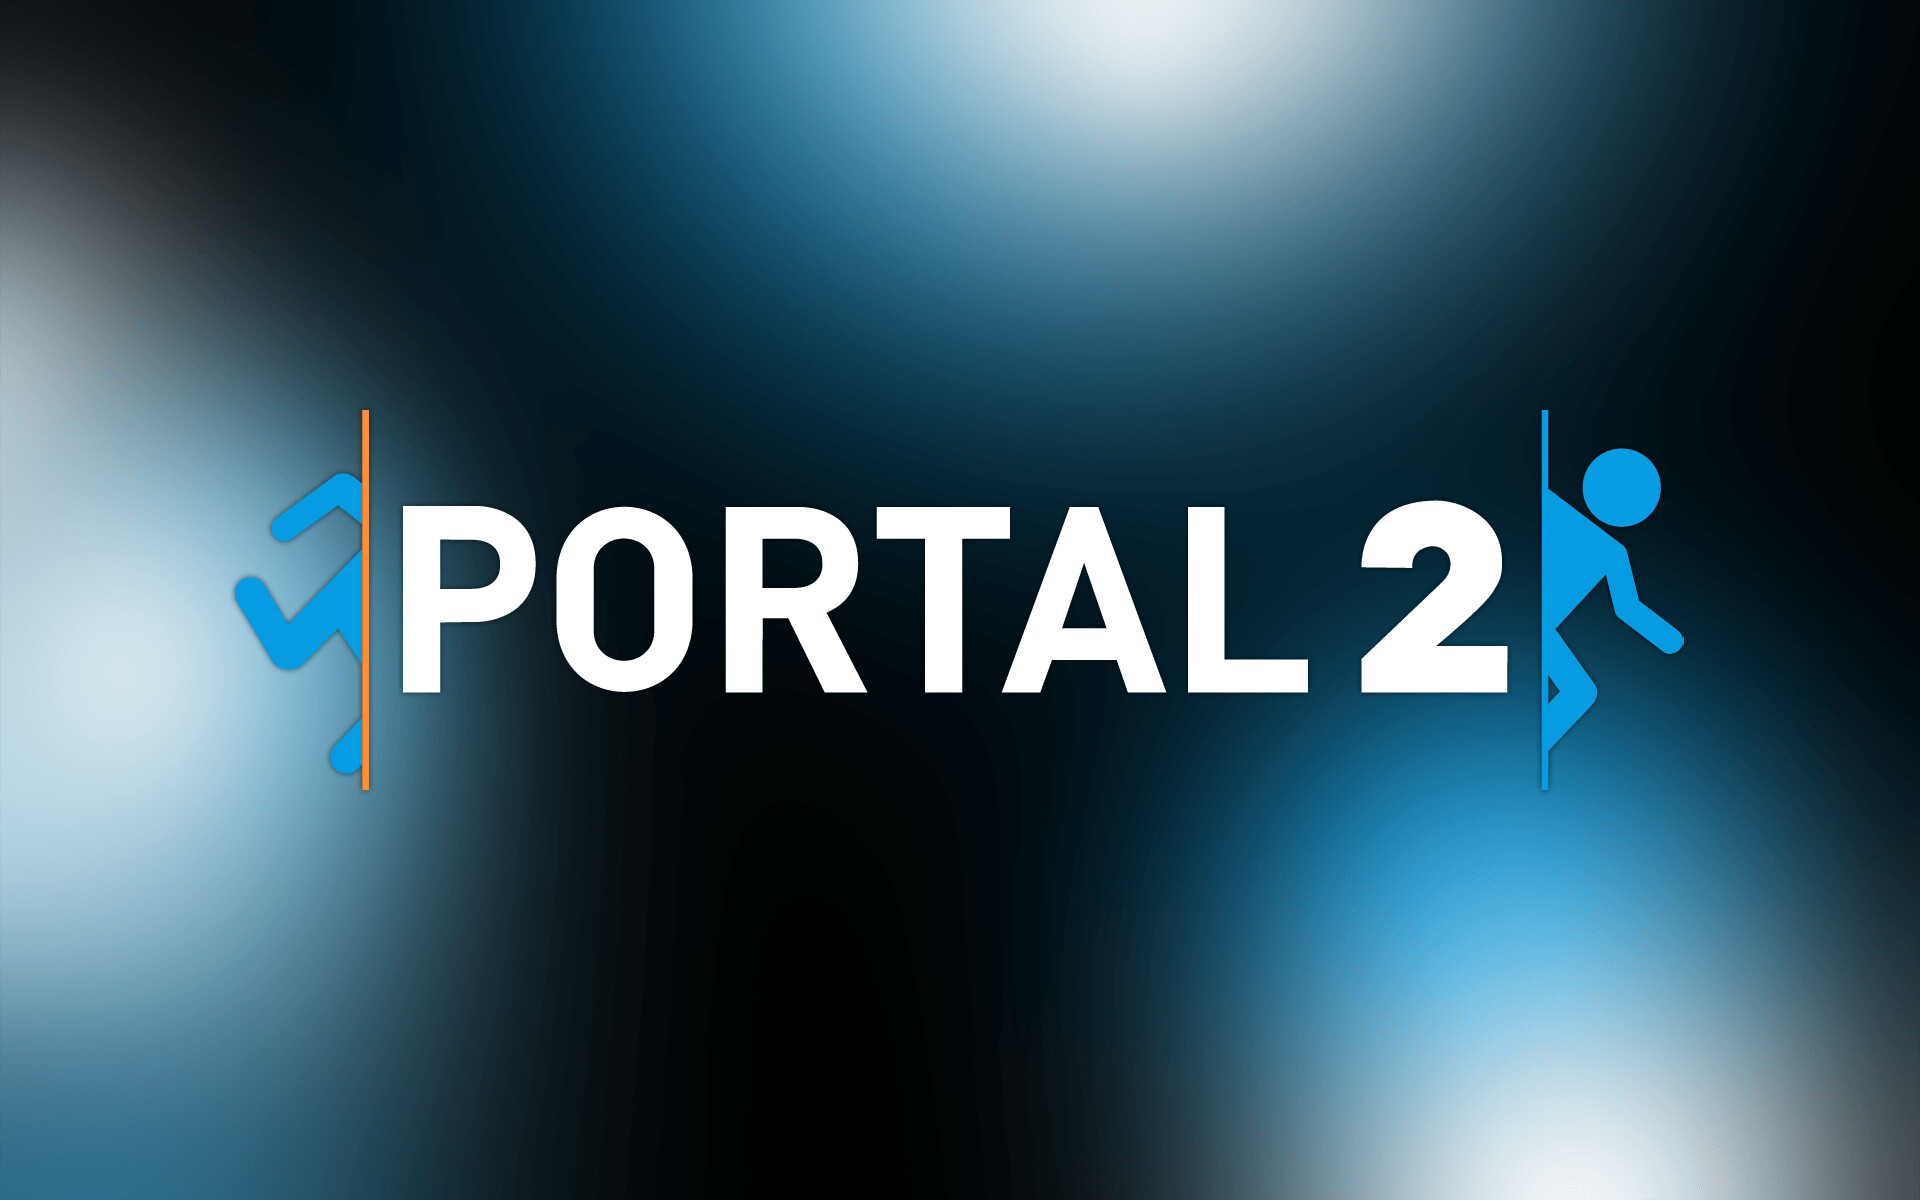 Portal 2 (Game): After release, Valve released downloadable content and a simplified map editor to allow players to create and share levels. 1920x1200 HD Wallpaper.